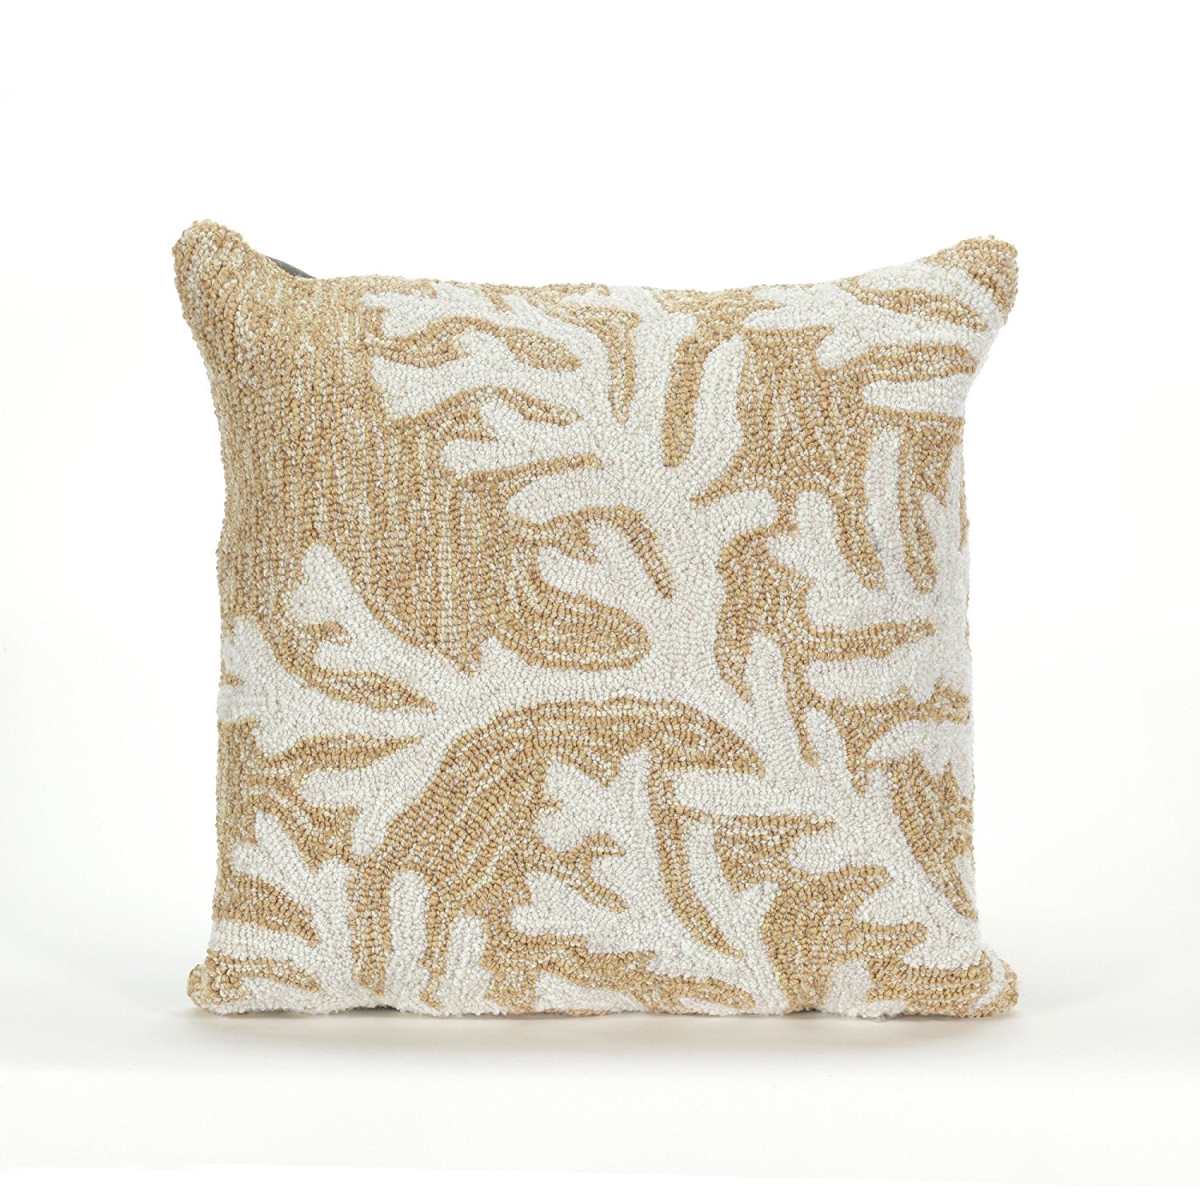 Trans Ocean 7fp8s162012 Frontporch Hand Tufted Square Pillows, 1620-12 Coral Neutral - 18 X 18 In.